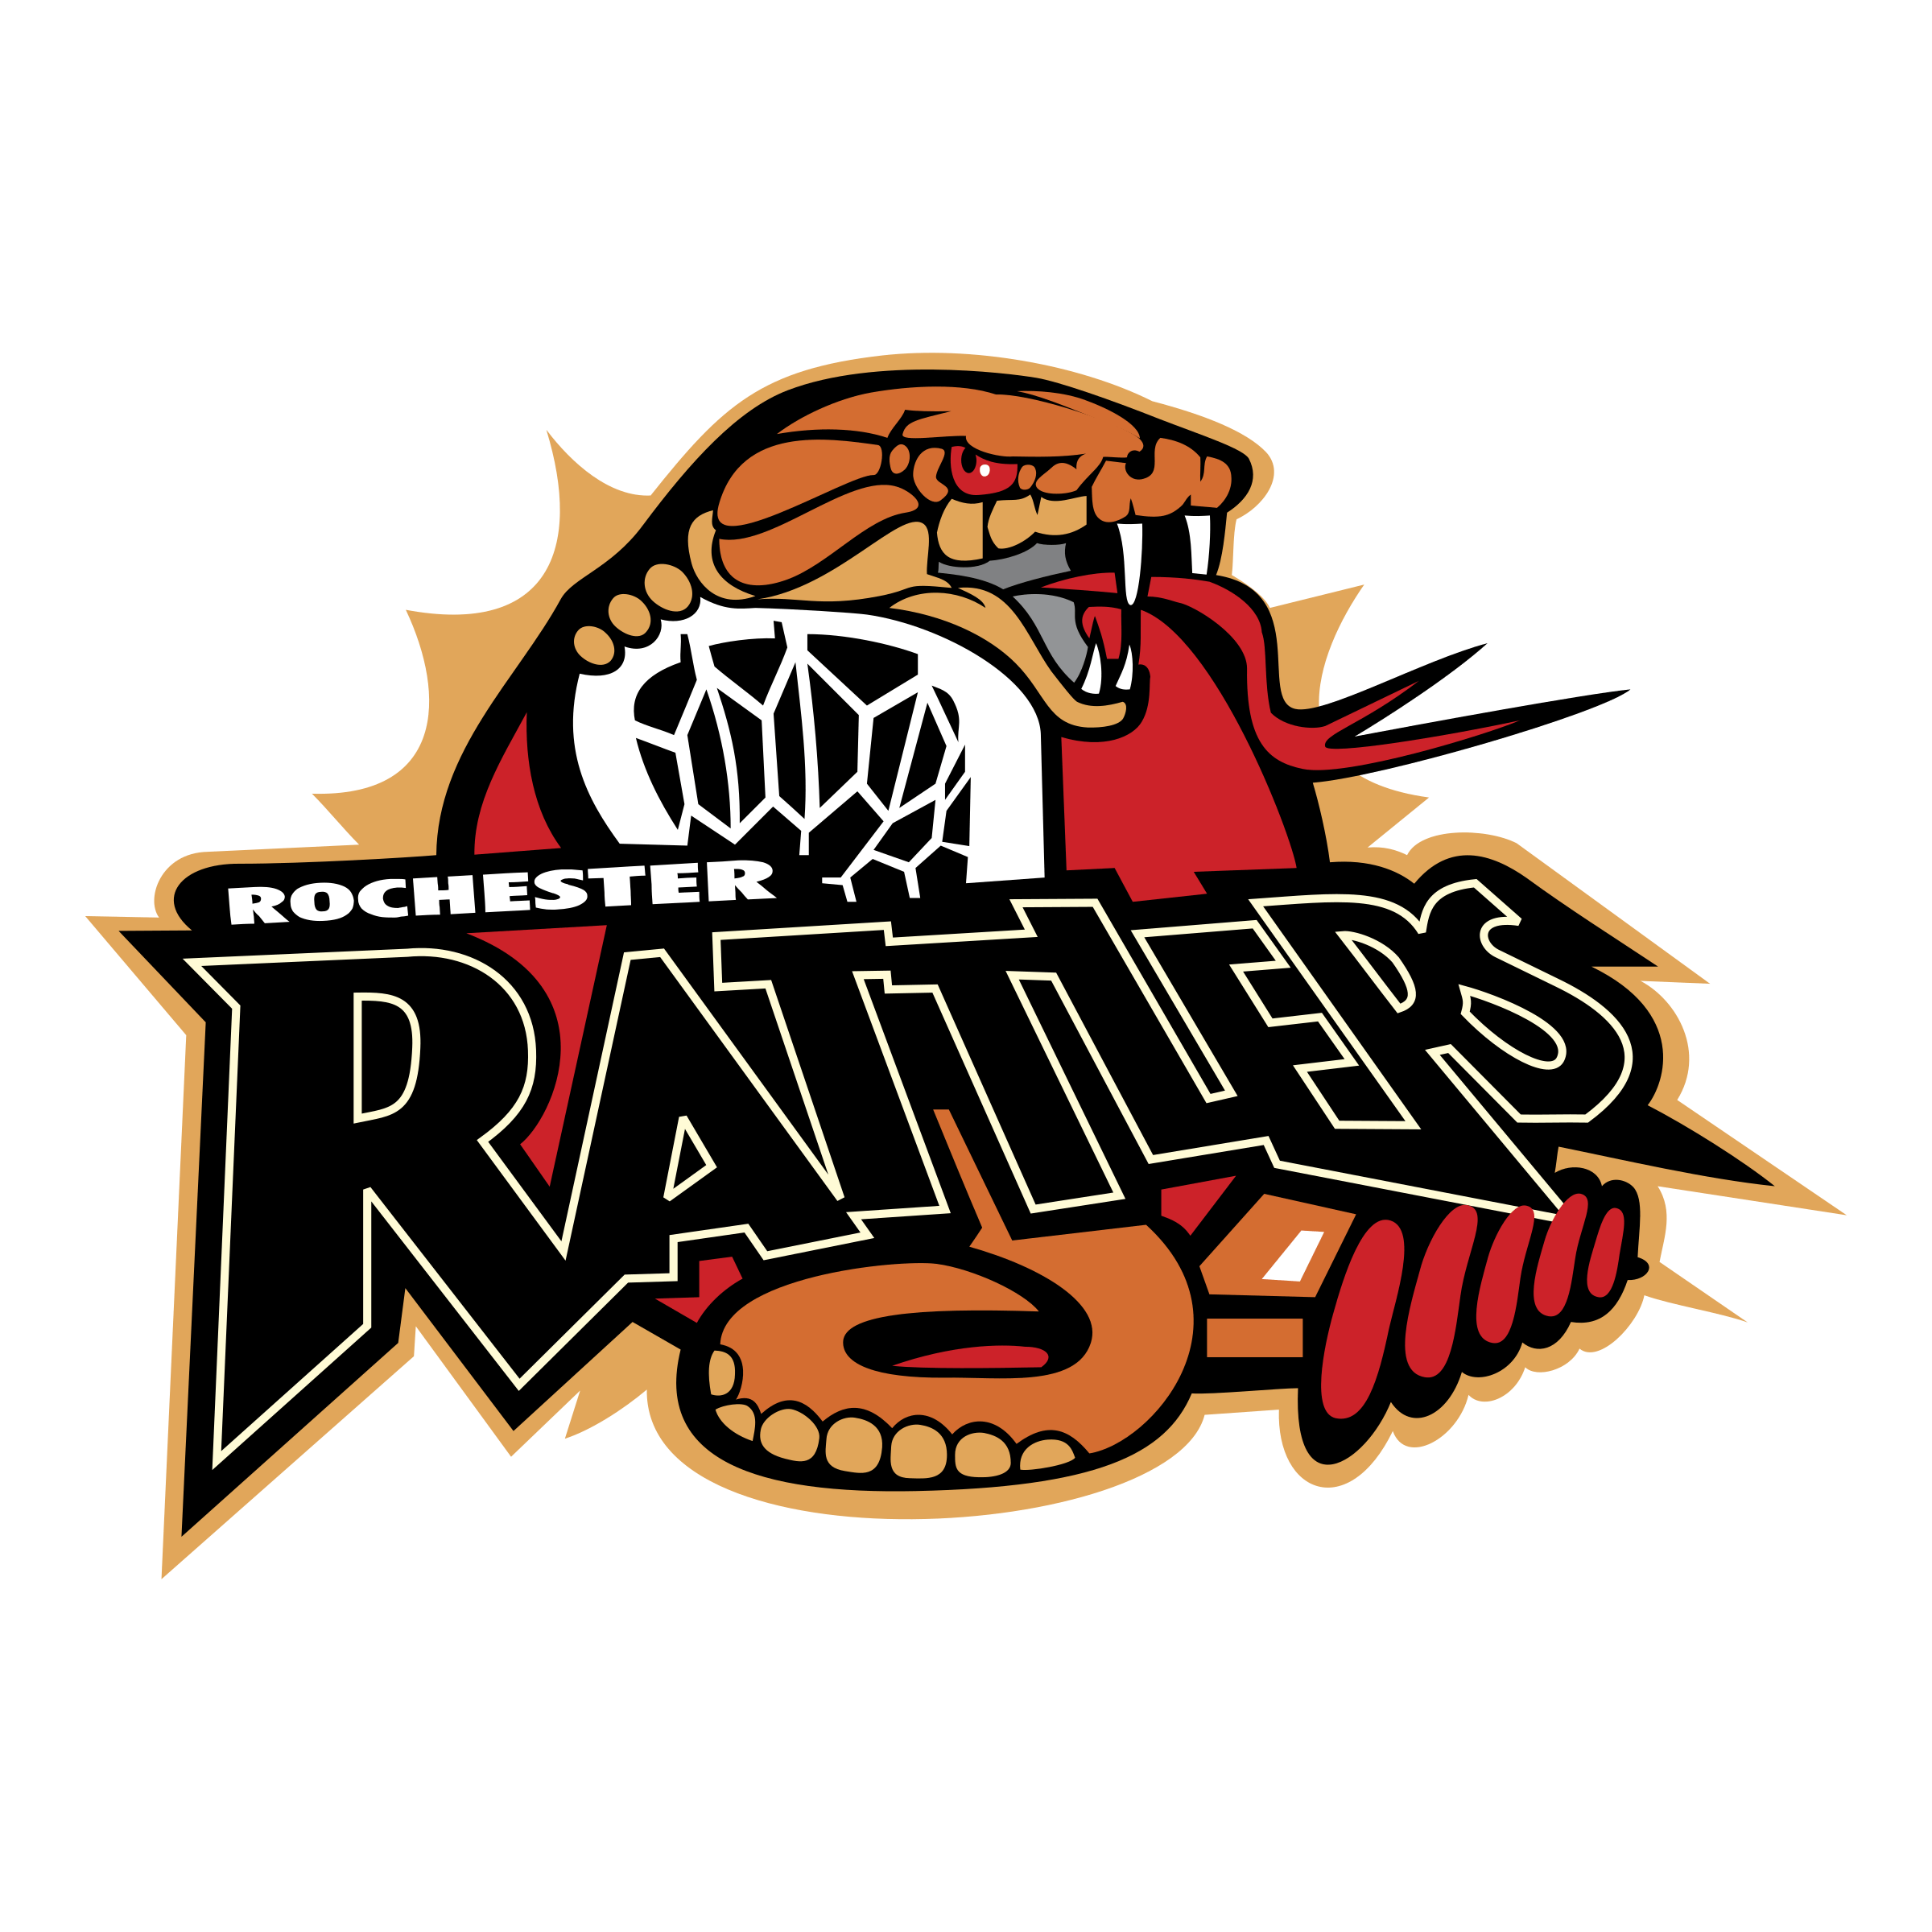 Rattlers Logo - Rochester Rattlers Logo PNG Transparent & SVG Vector - Freebie Supply